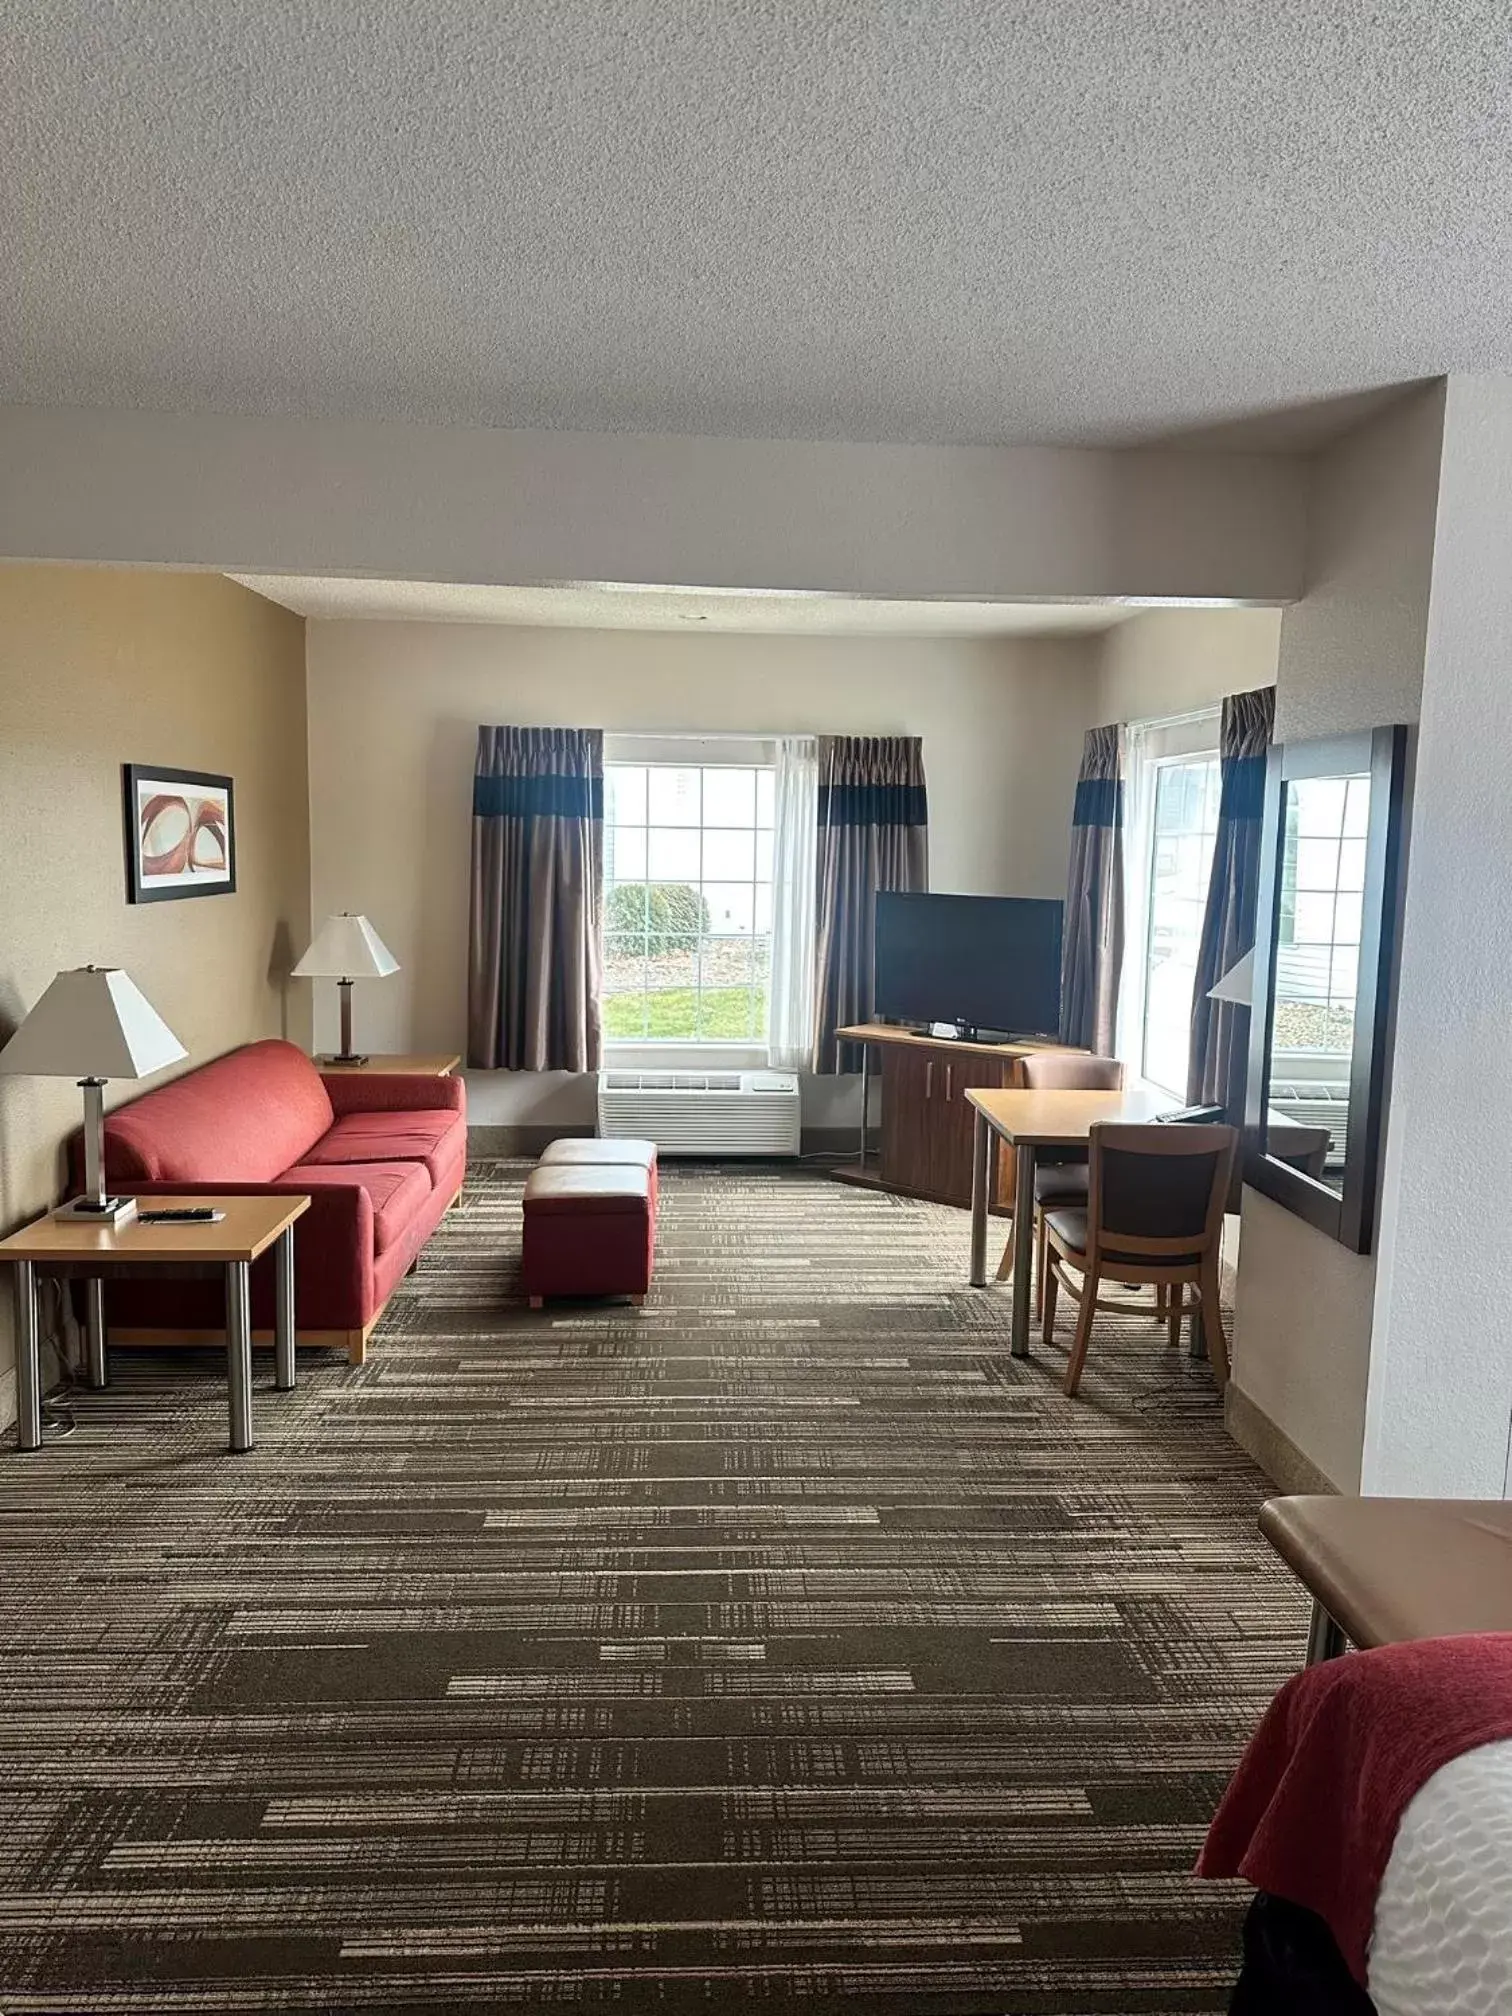 Northfield Inn Suites and Conference Center